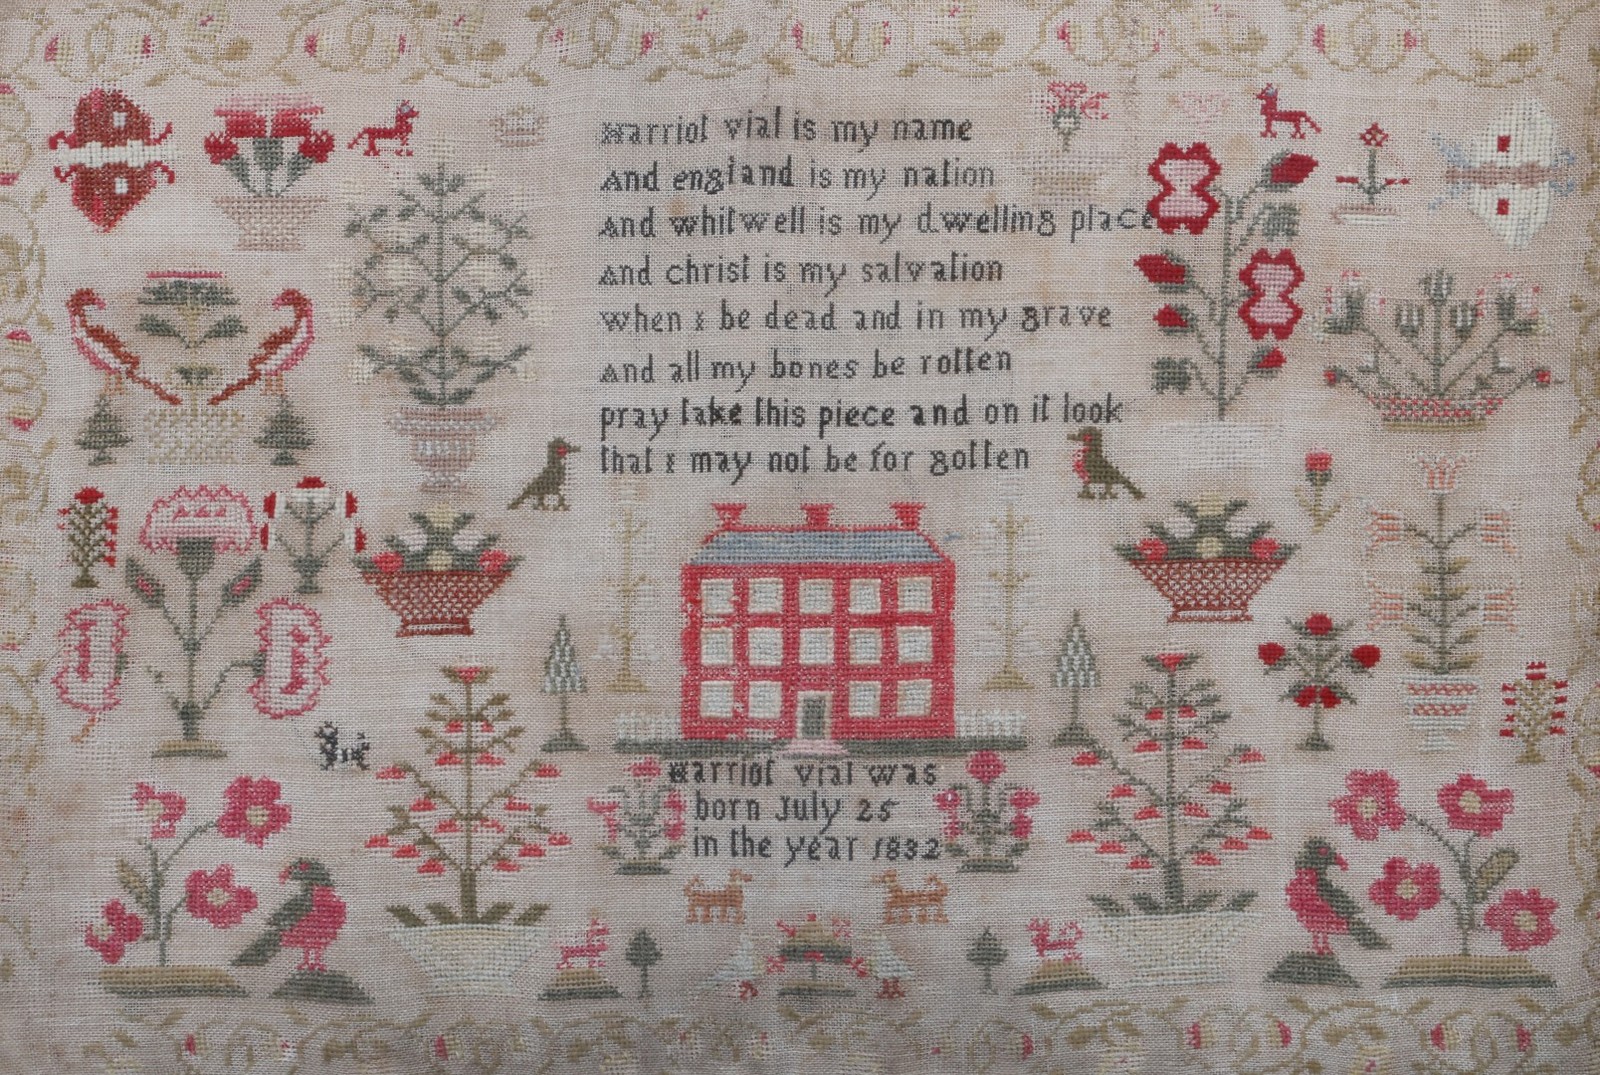 A LARGE NEEDLEWORK SAMPLER with a design of a central country house in a field of birds and trees